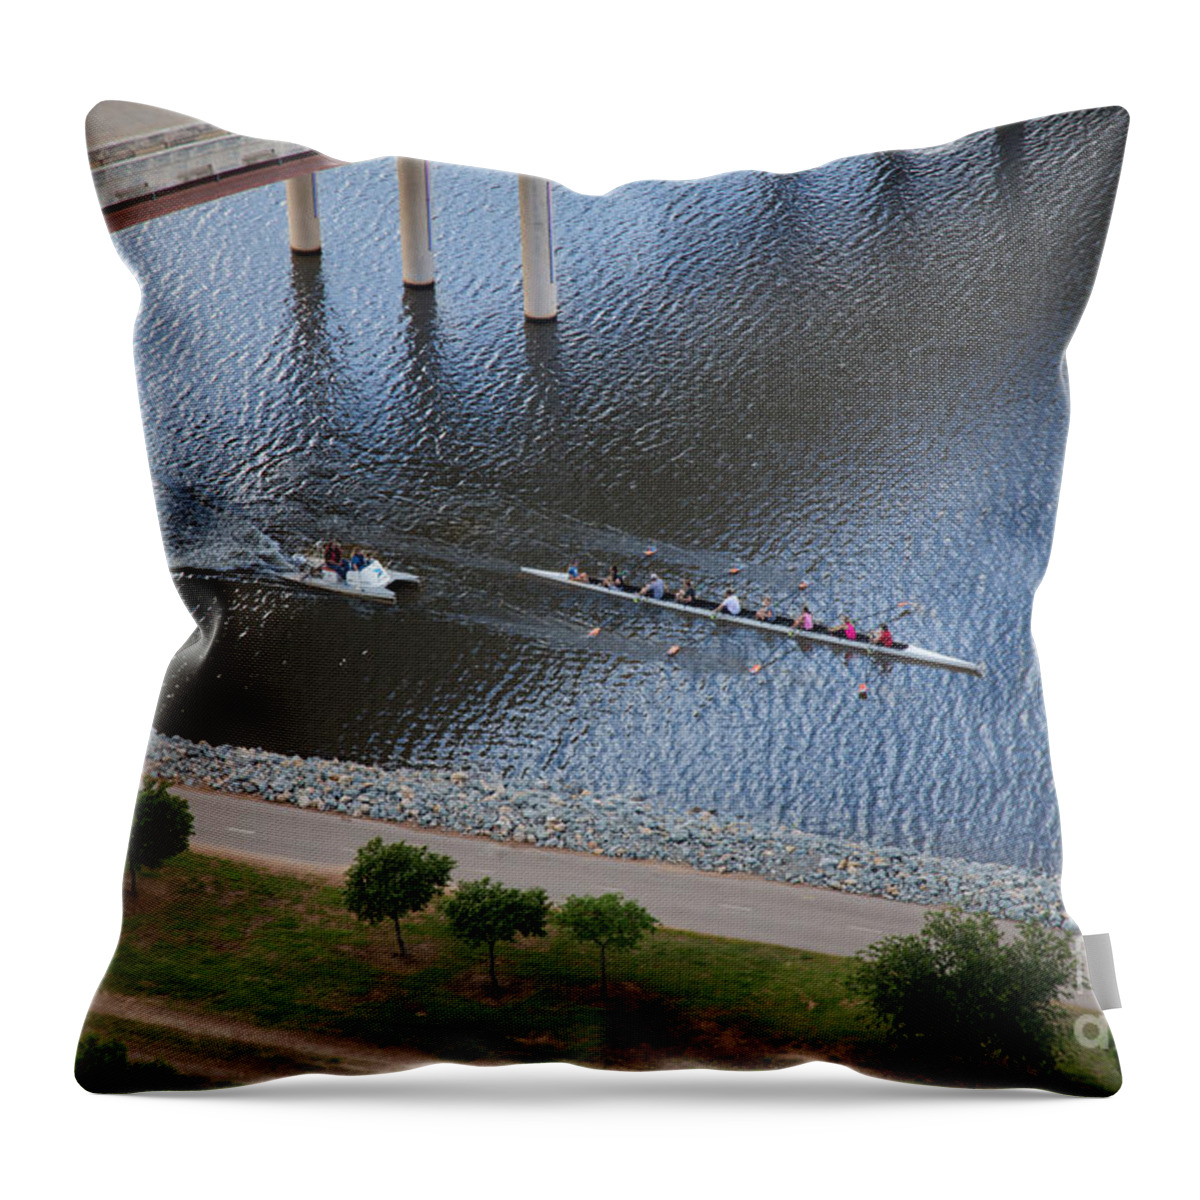 Oklahoma City Throw Pillow featuring the photograph Oklahoma City Row Team by Cooper Ross